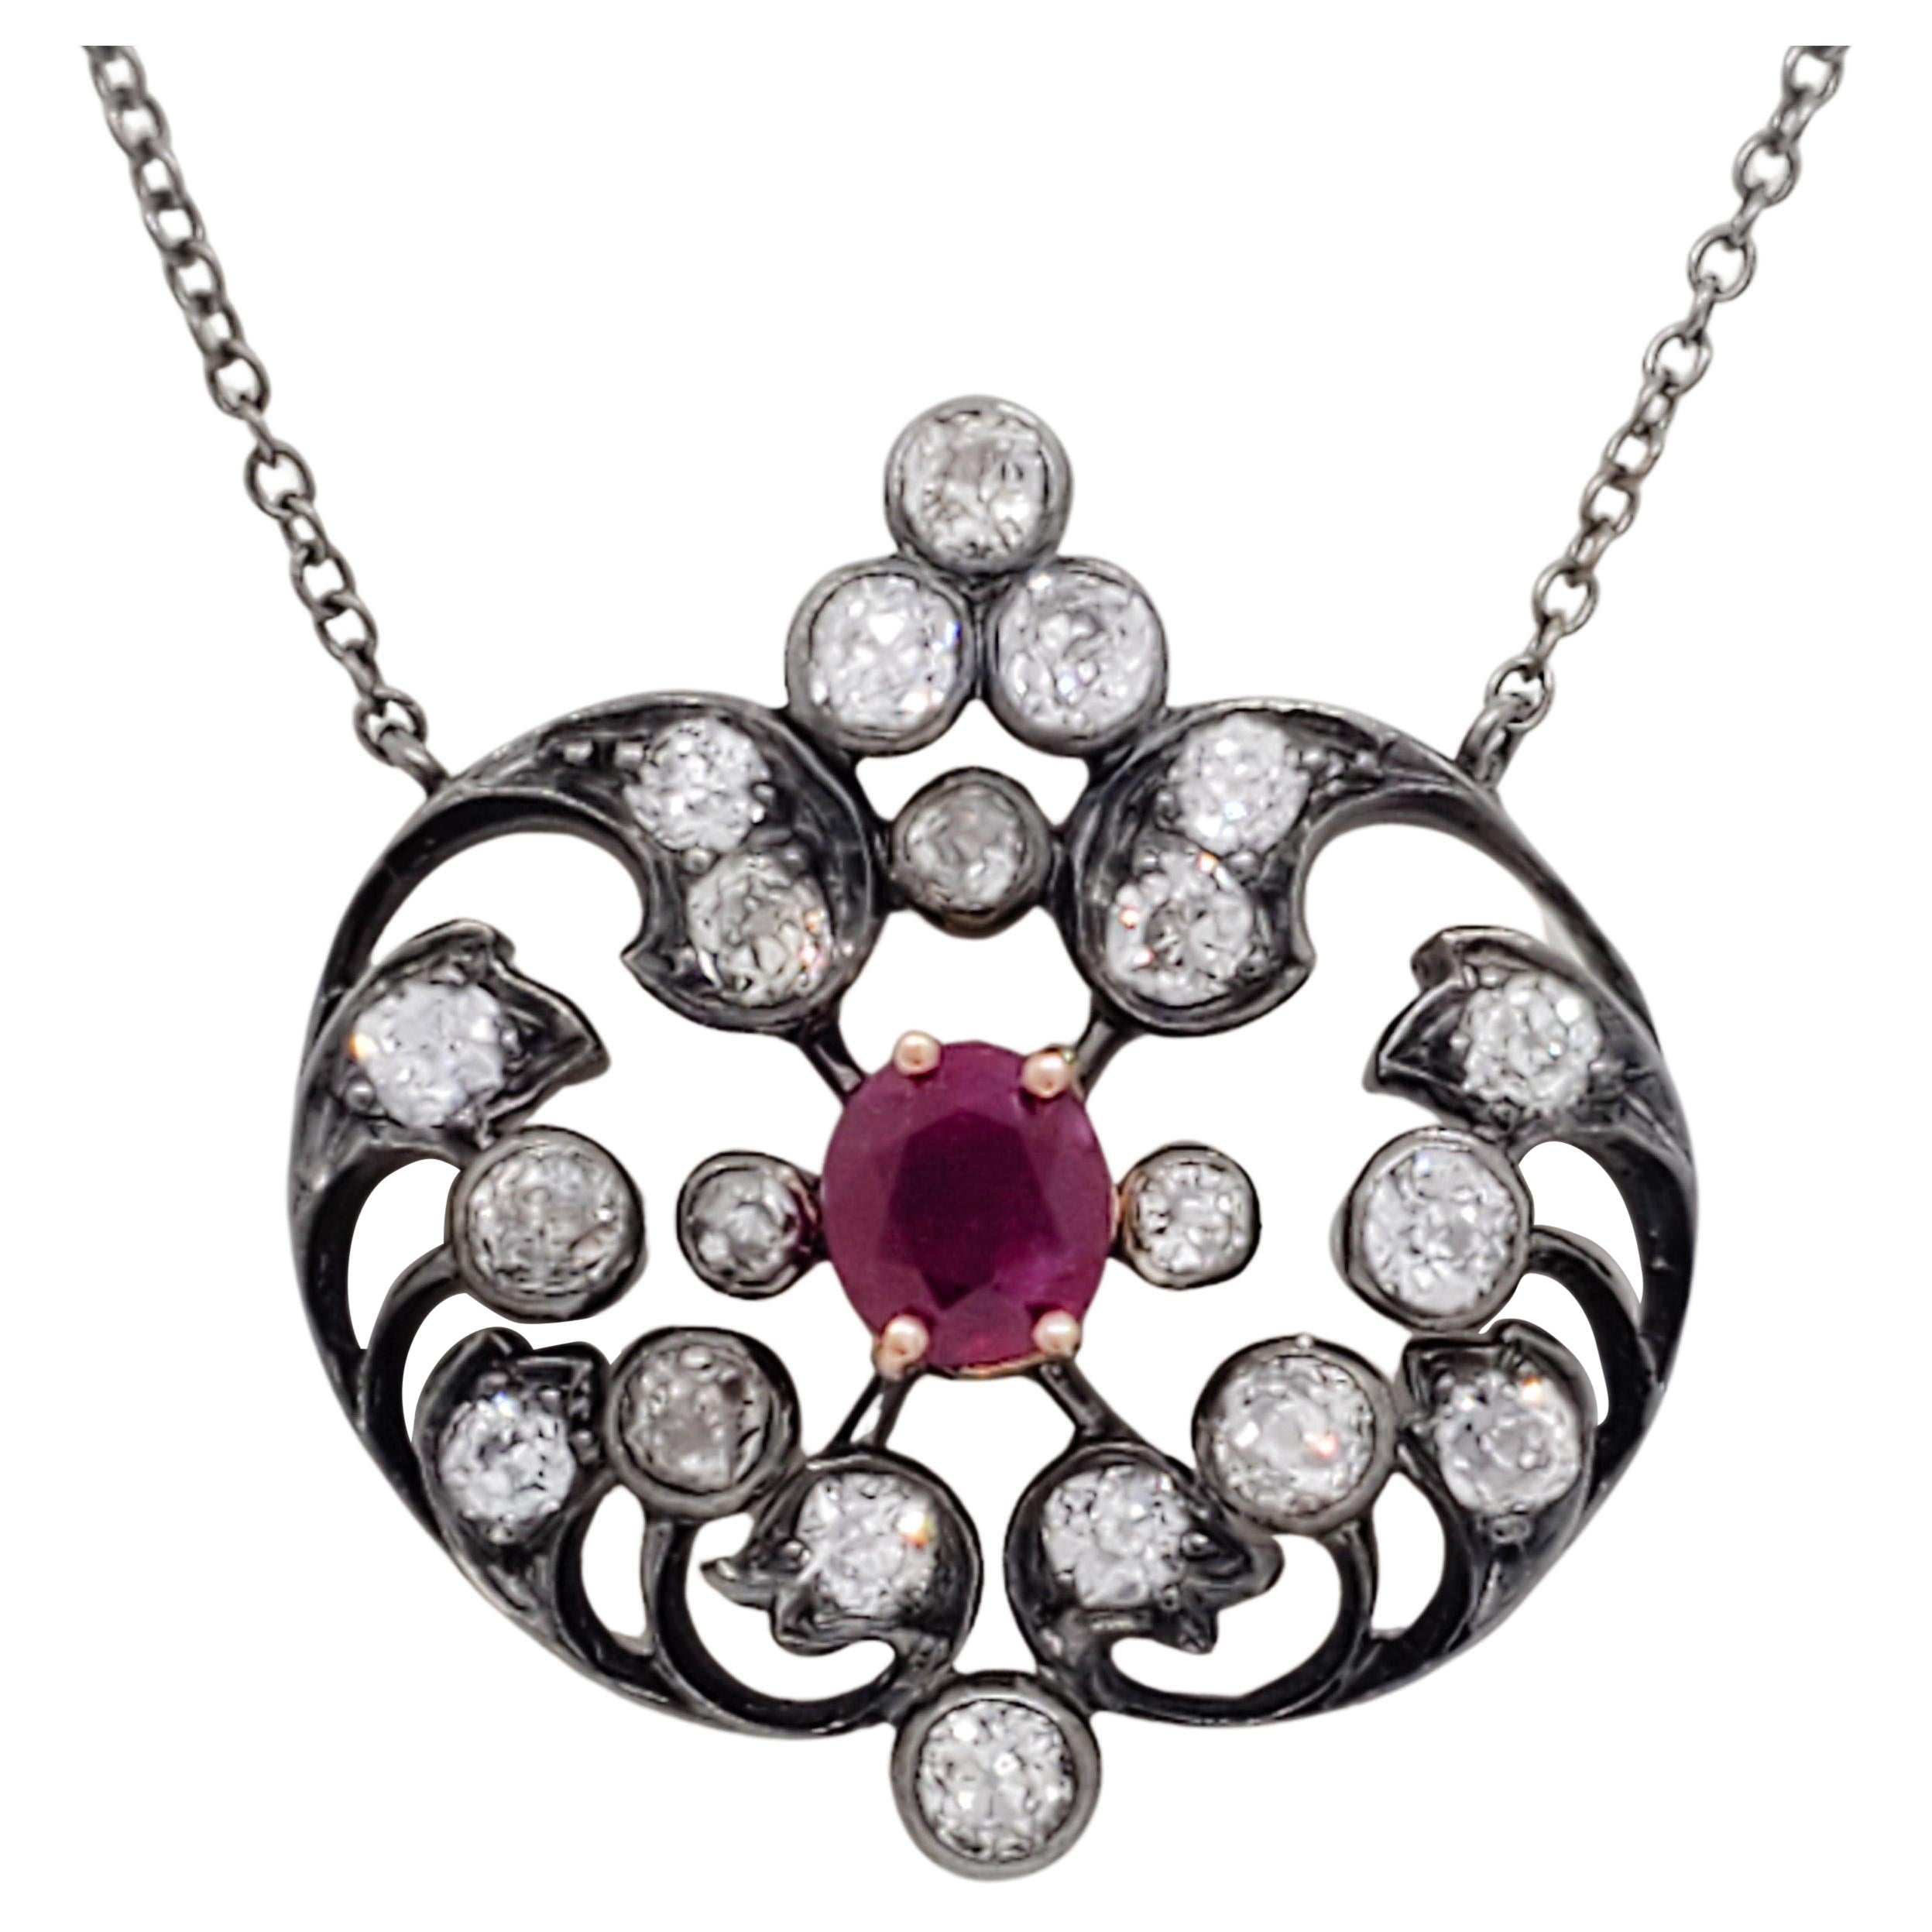 Victorian Era Burma Ruby and Diamond Necklace in 18k Gold